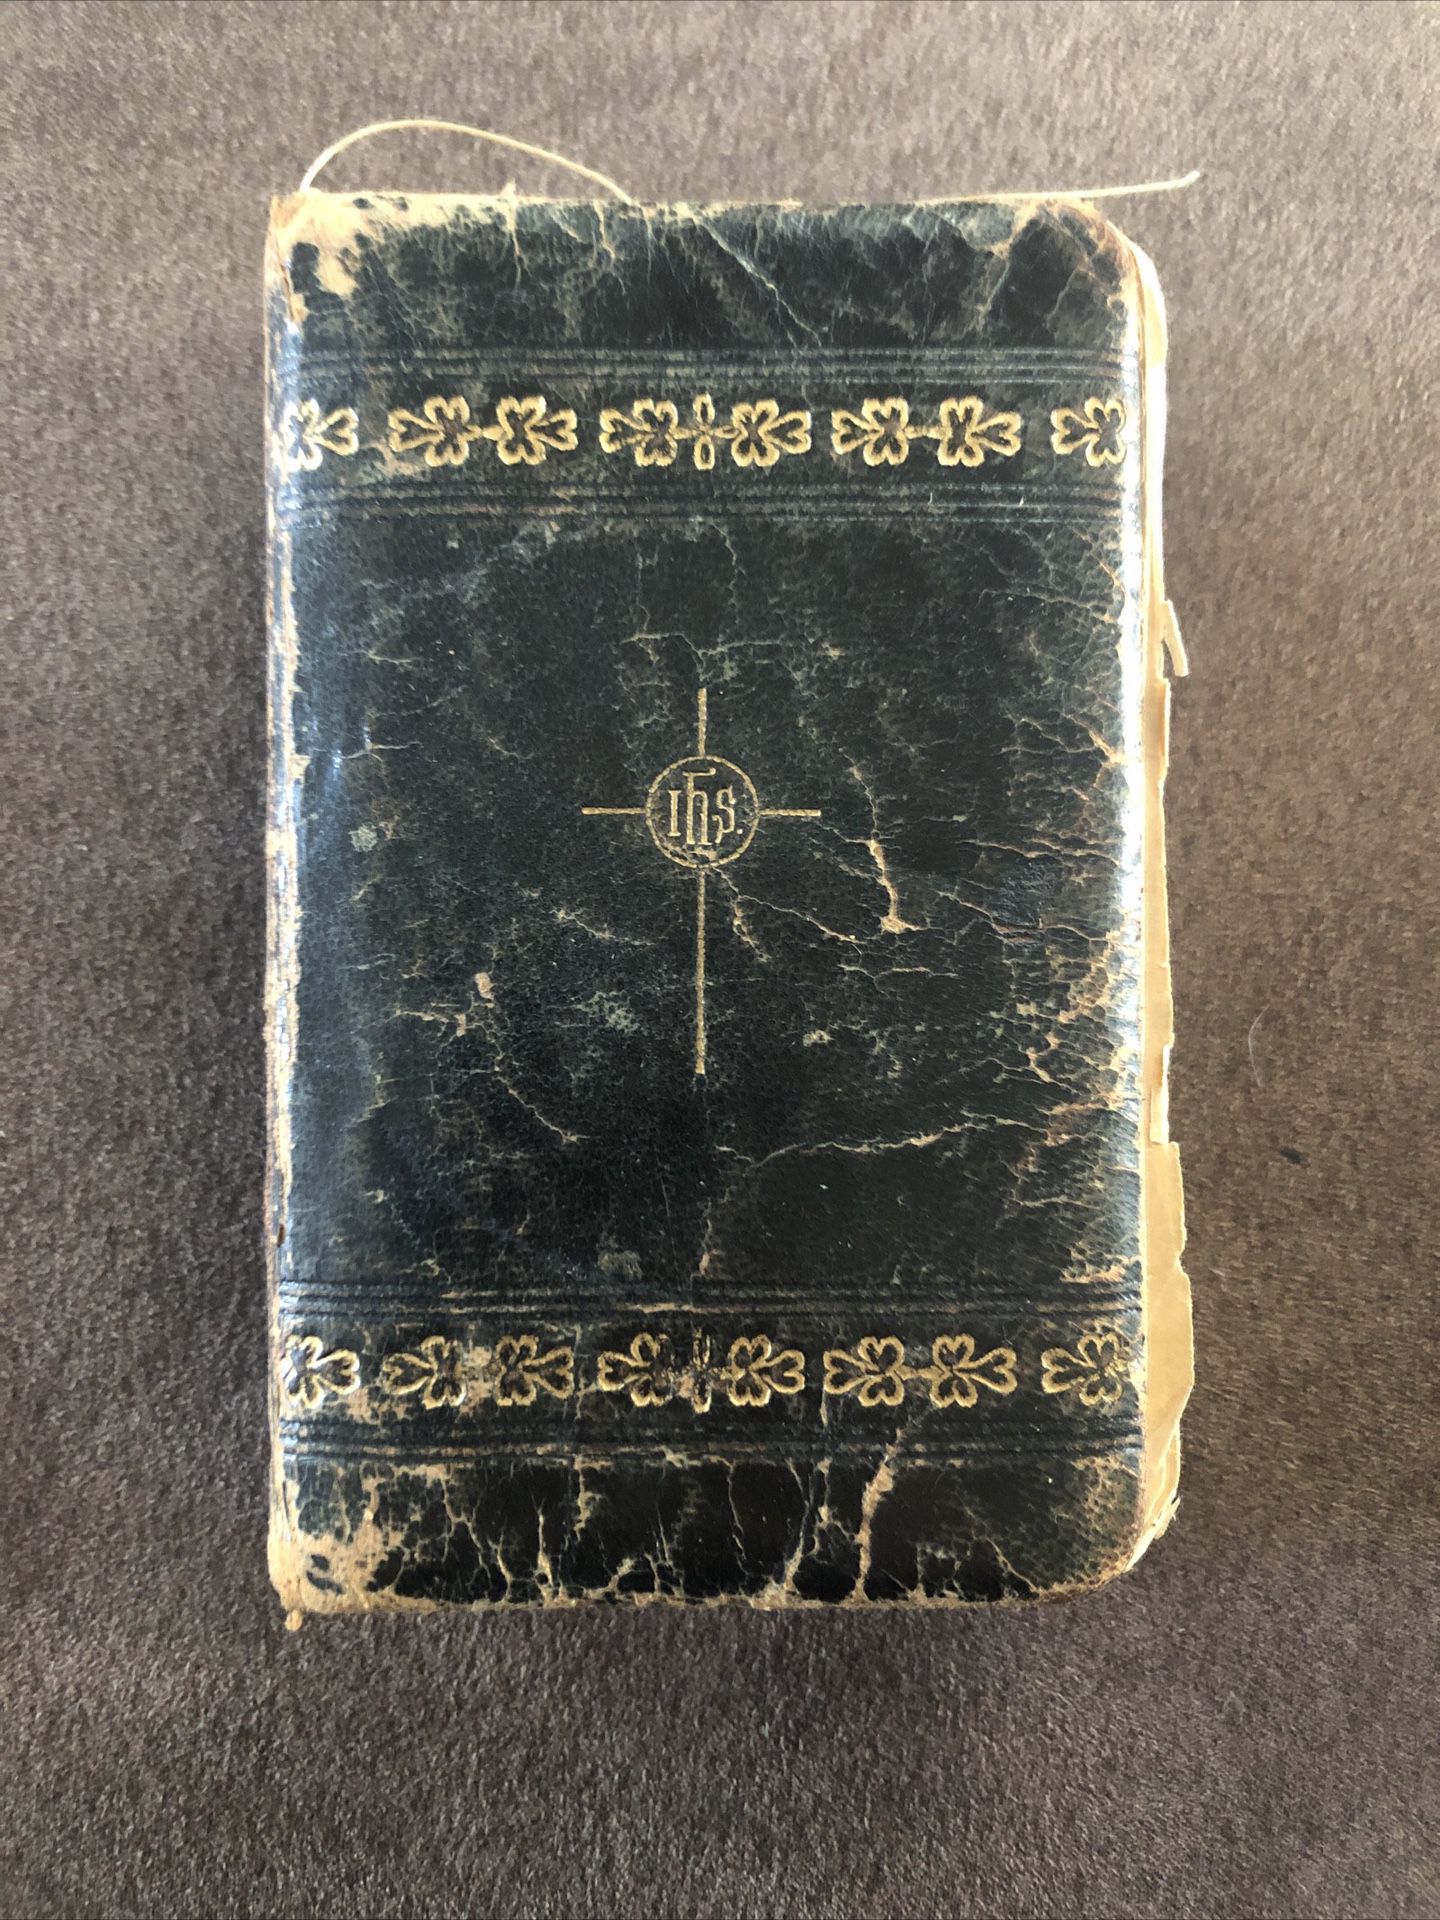 Antique Key To Heaven Religious Book-Missing Pgs And Beginning Pages Are Loose Fair Condition 